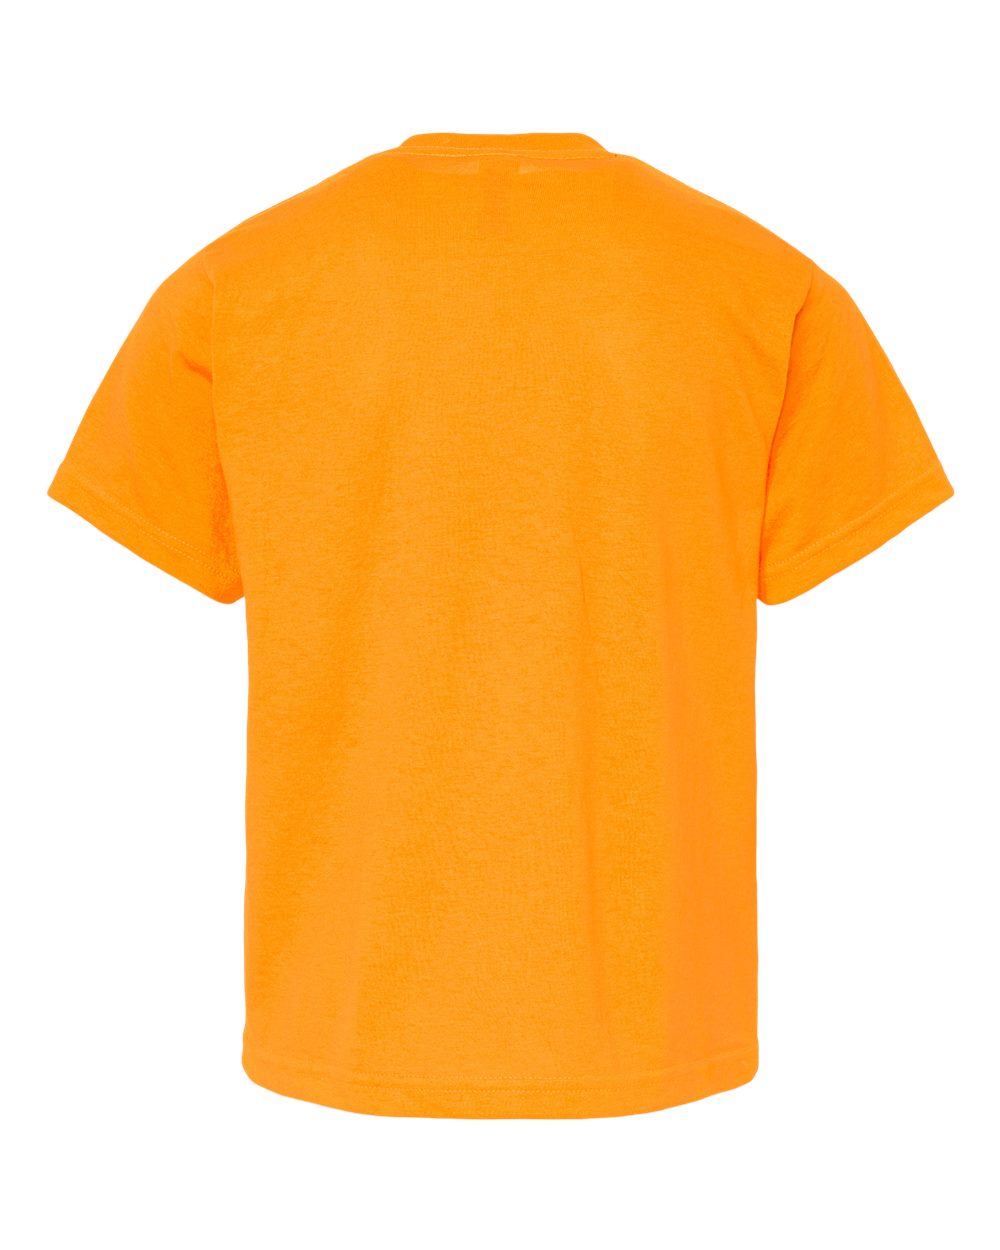 M&O Youth Gold Soft Touch T-Shirt 4850 #color_Safety Orange